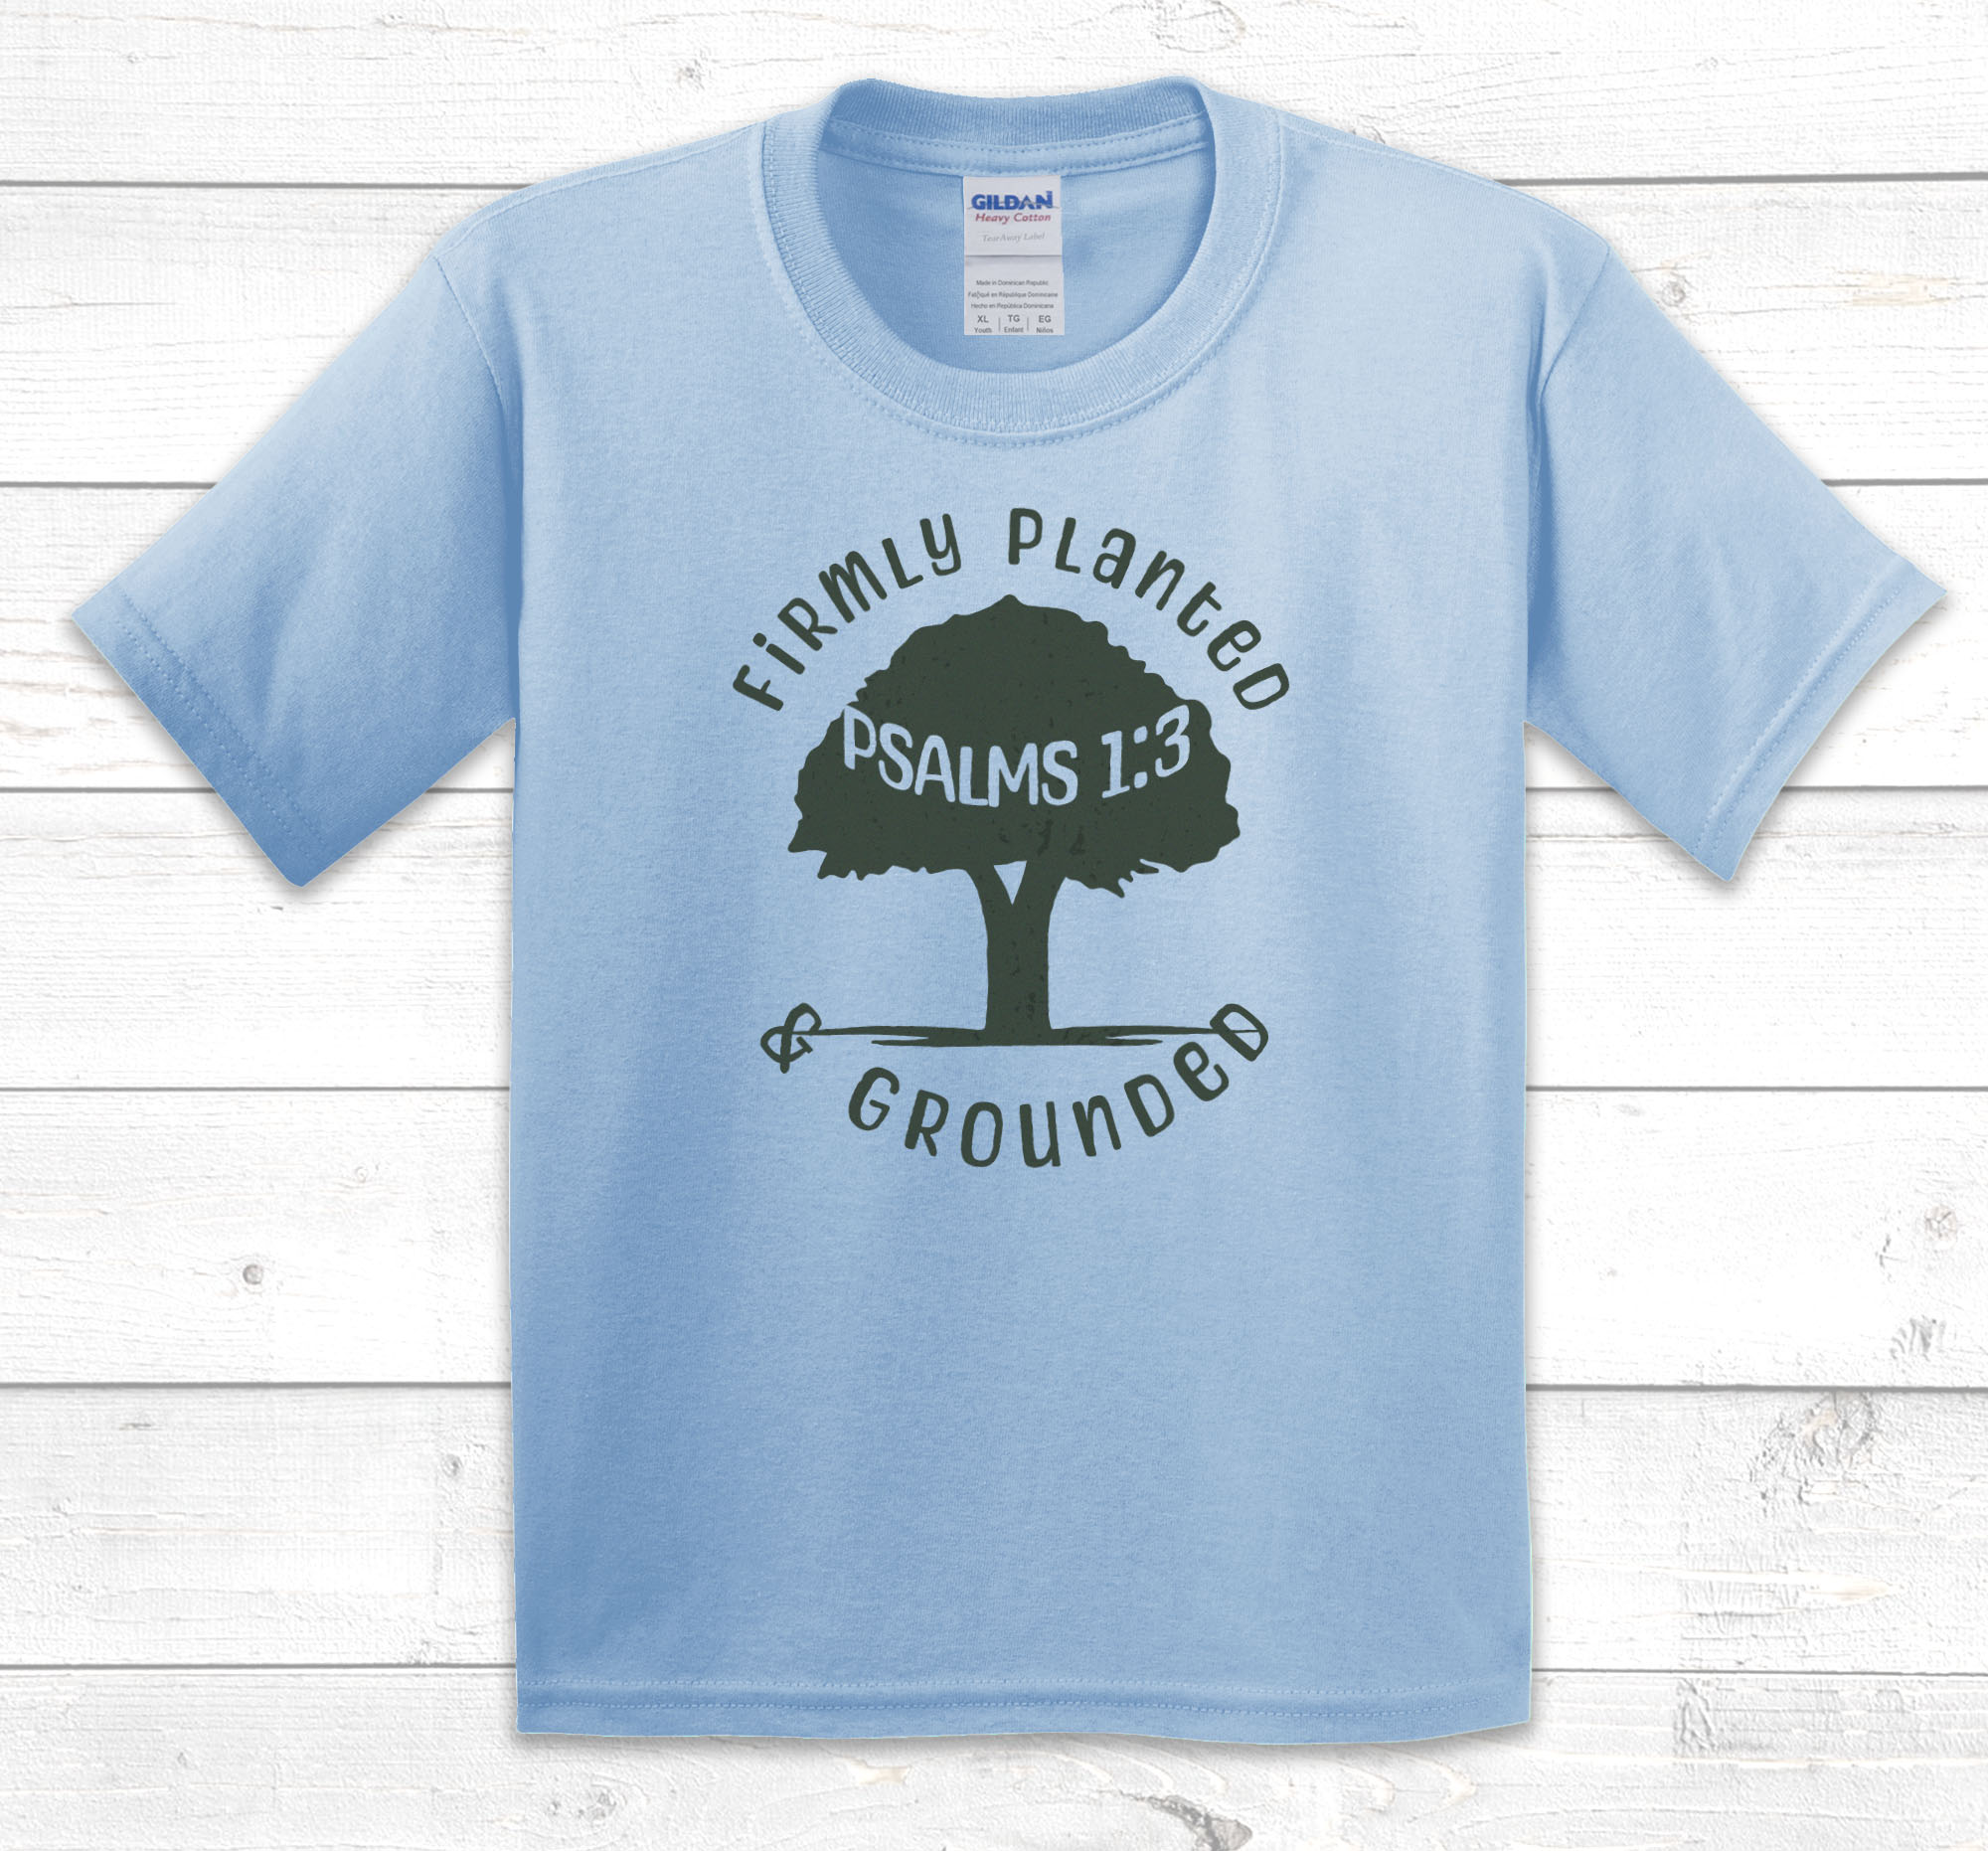 Christian inspired t-shirts for kids 